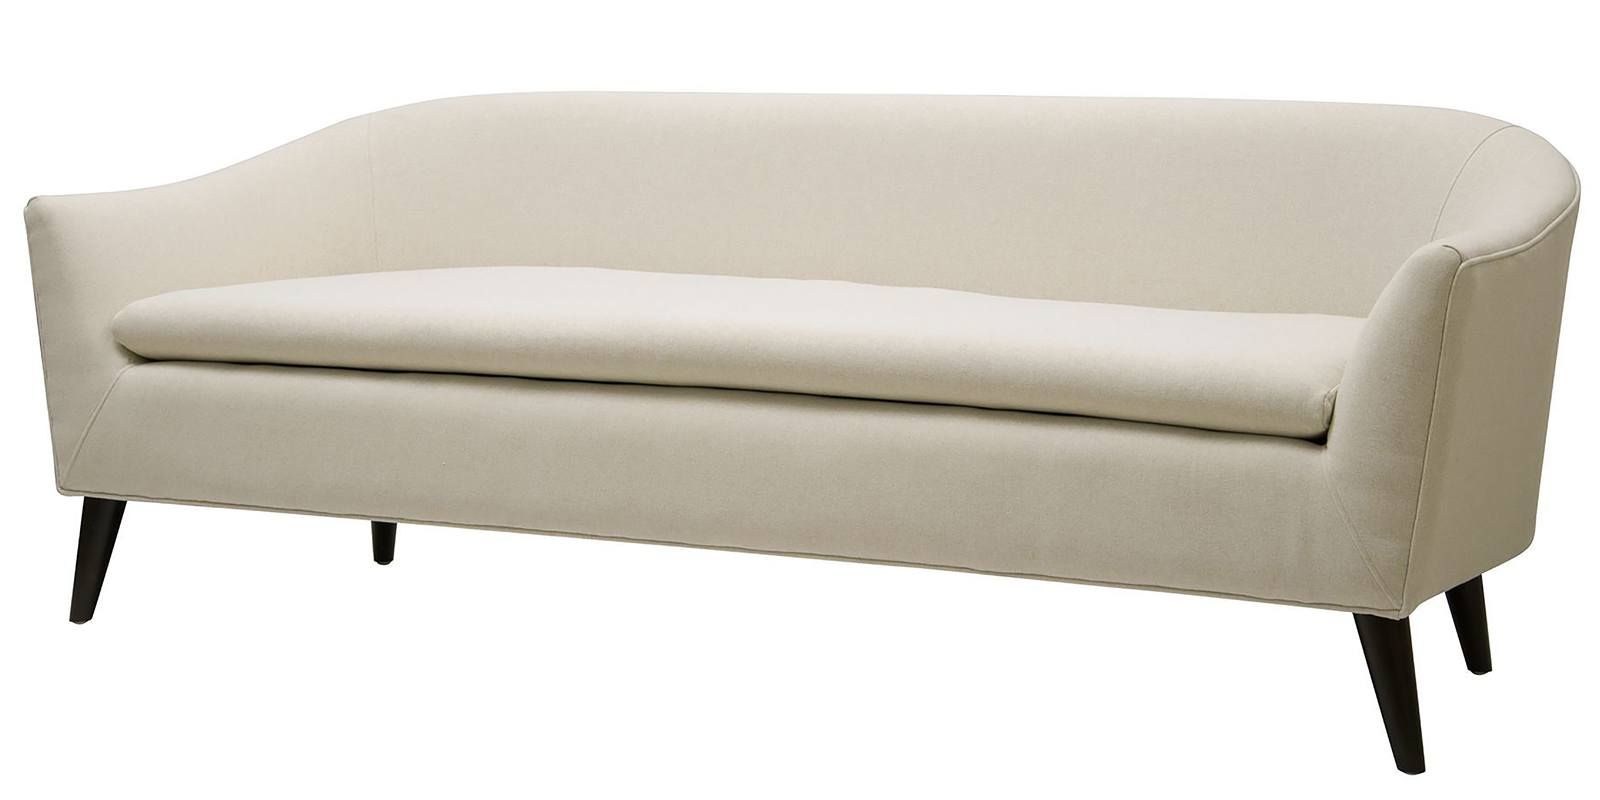 Fashionable Classiest Mid Century Three Seater Sofa In White Colour – Dreamzz For Mid Century 3 Seat Couches (View 2 of 15)